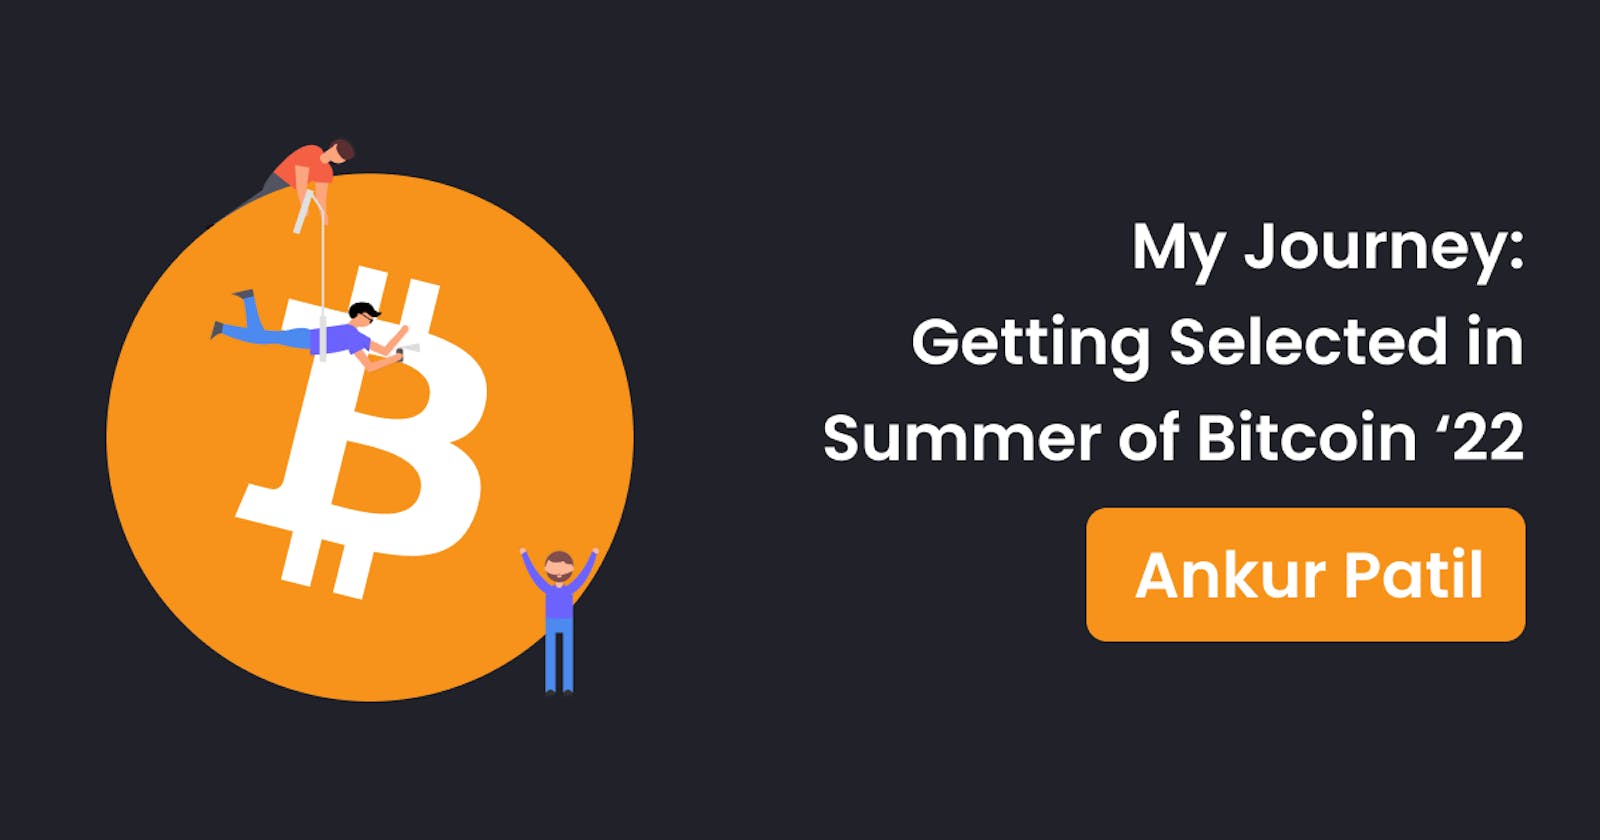 My Journey: Getting Selected in Summer of Bitcoin '22